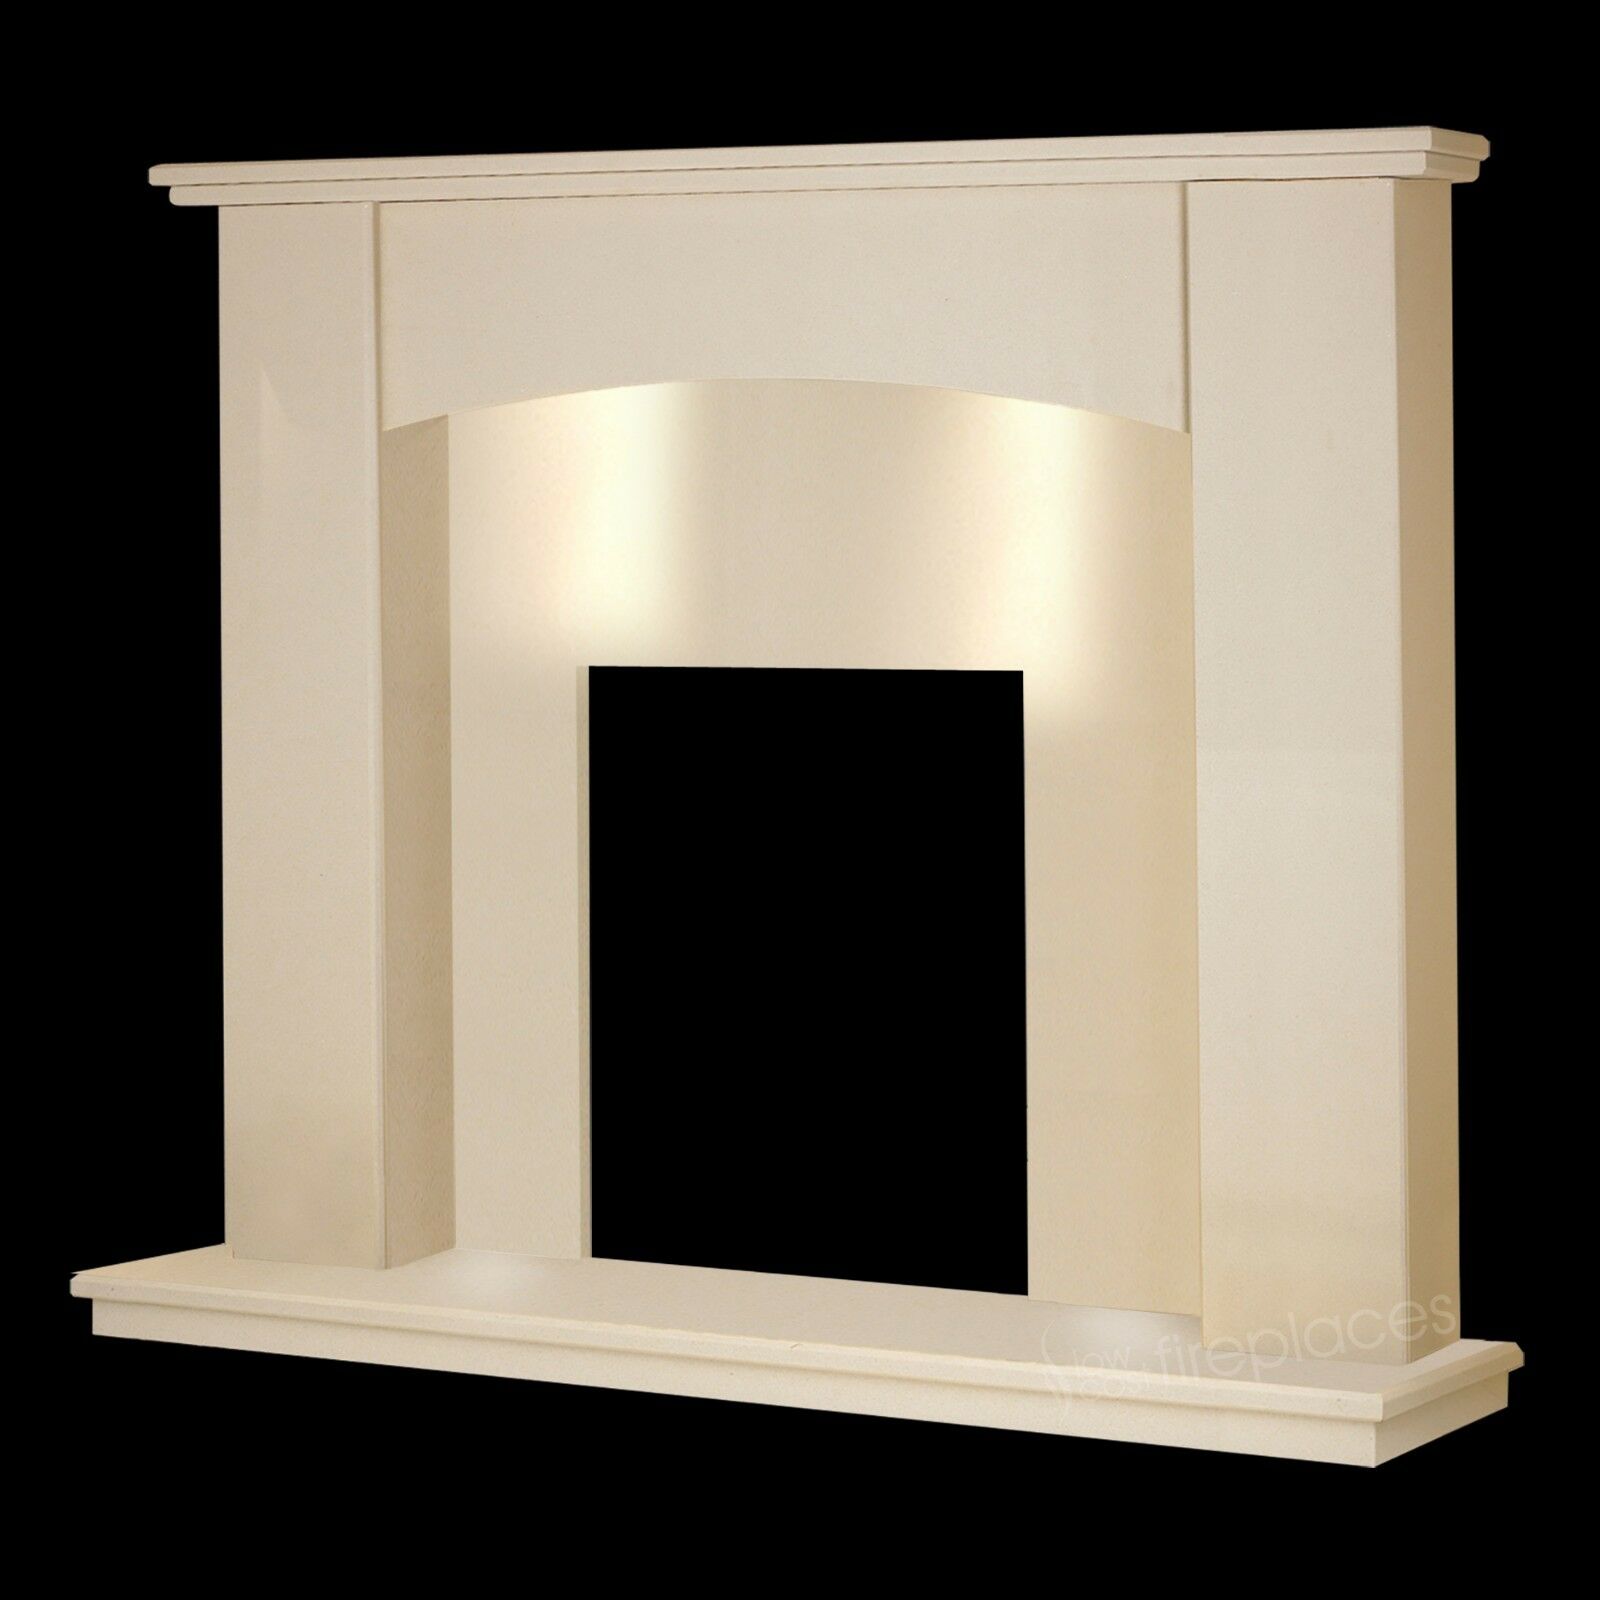 Electric Fireplace with Wood Mantel Fresh Details About Cream Stone Marble Modern Curved Surround Electric Fire Fireplace Suite Lights